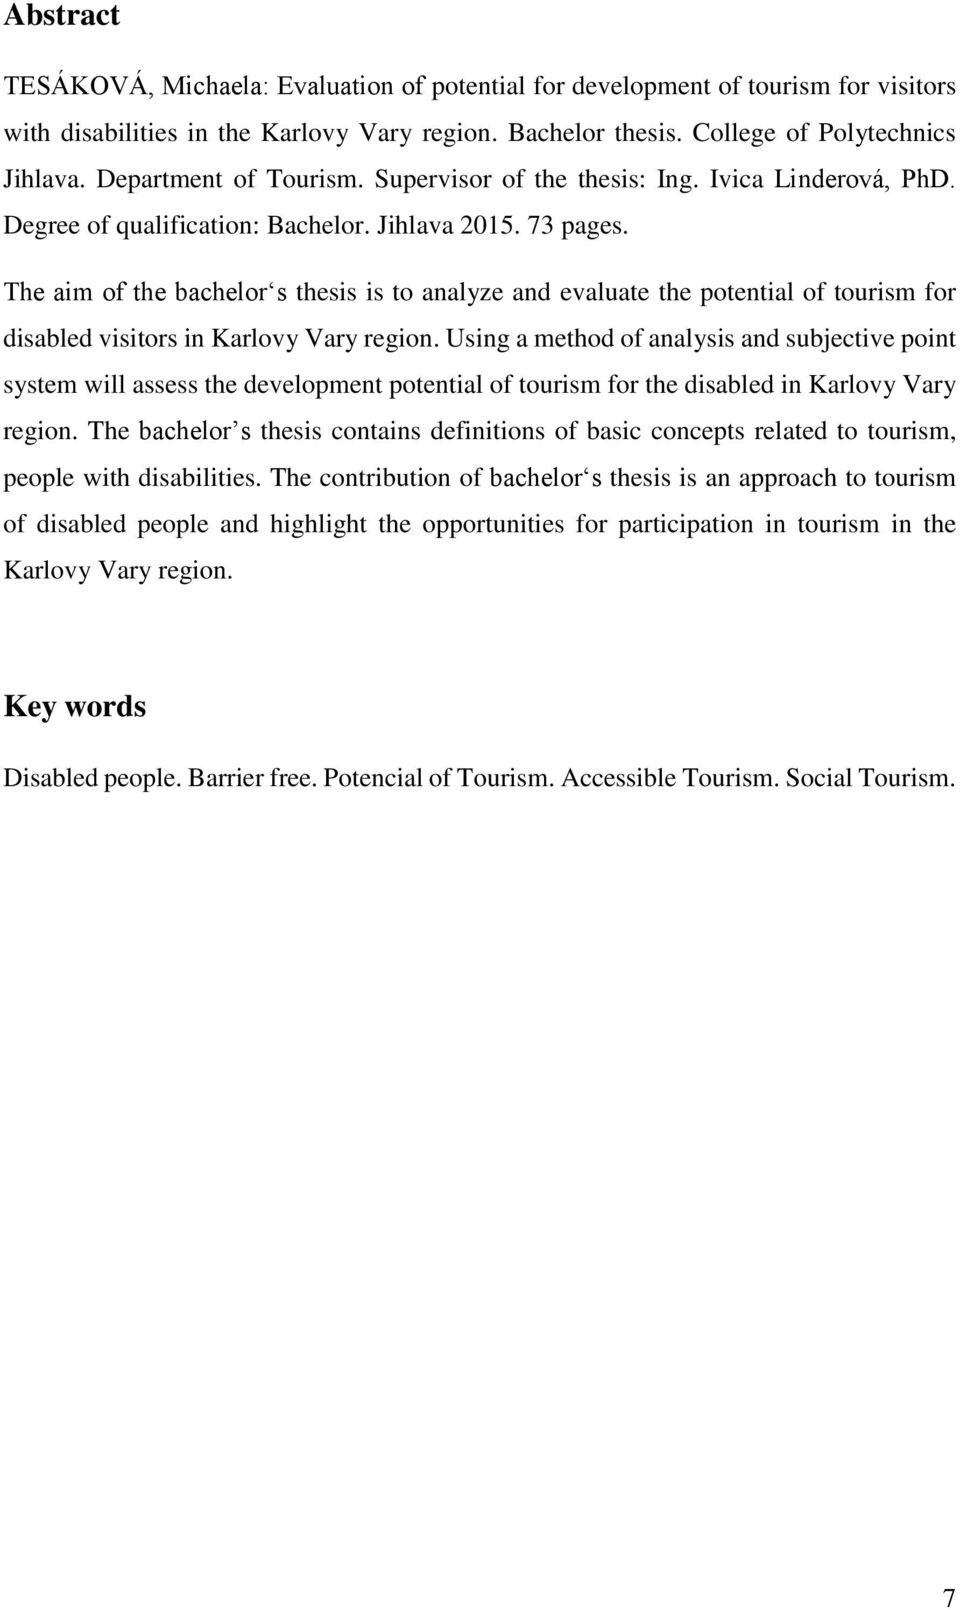 The aim of the bachelor s thesis is to analyze and evaluate the potential of tourism for disabled visitors in Karlovy Vary region.